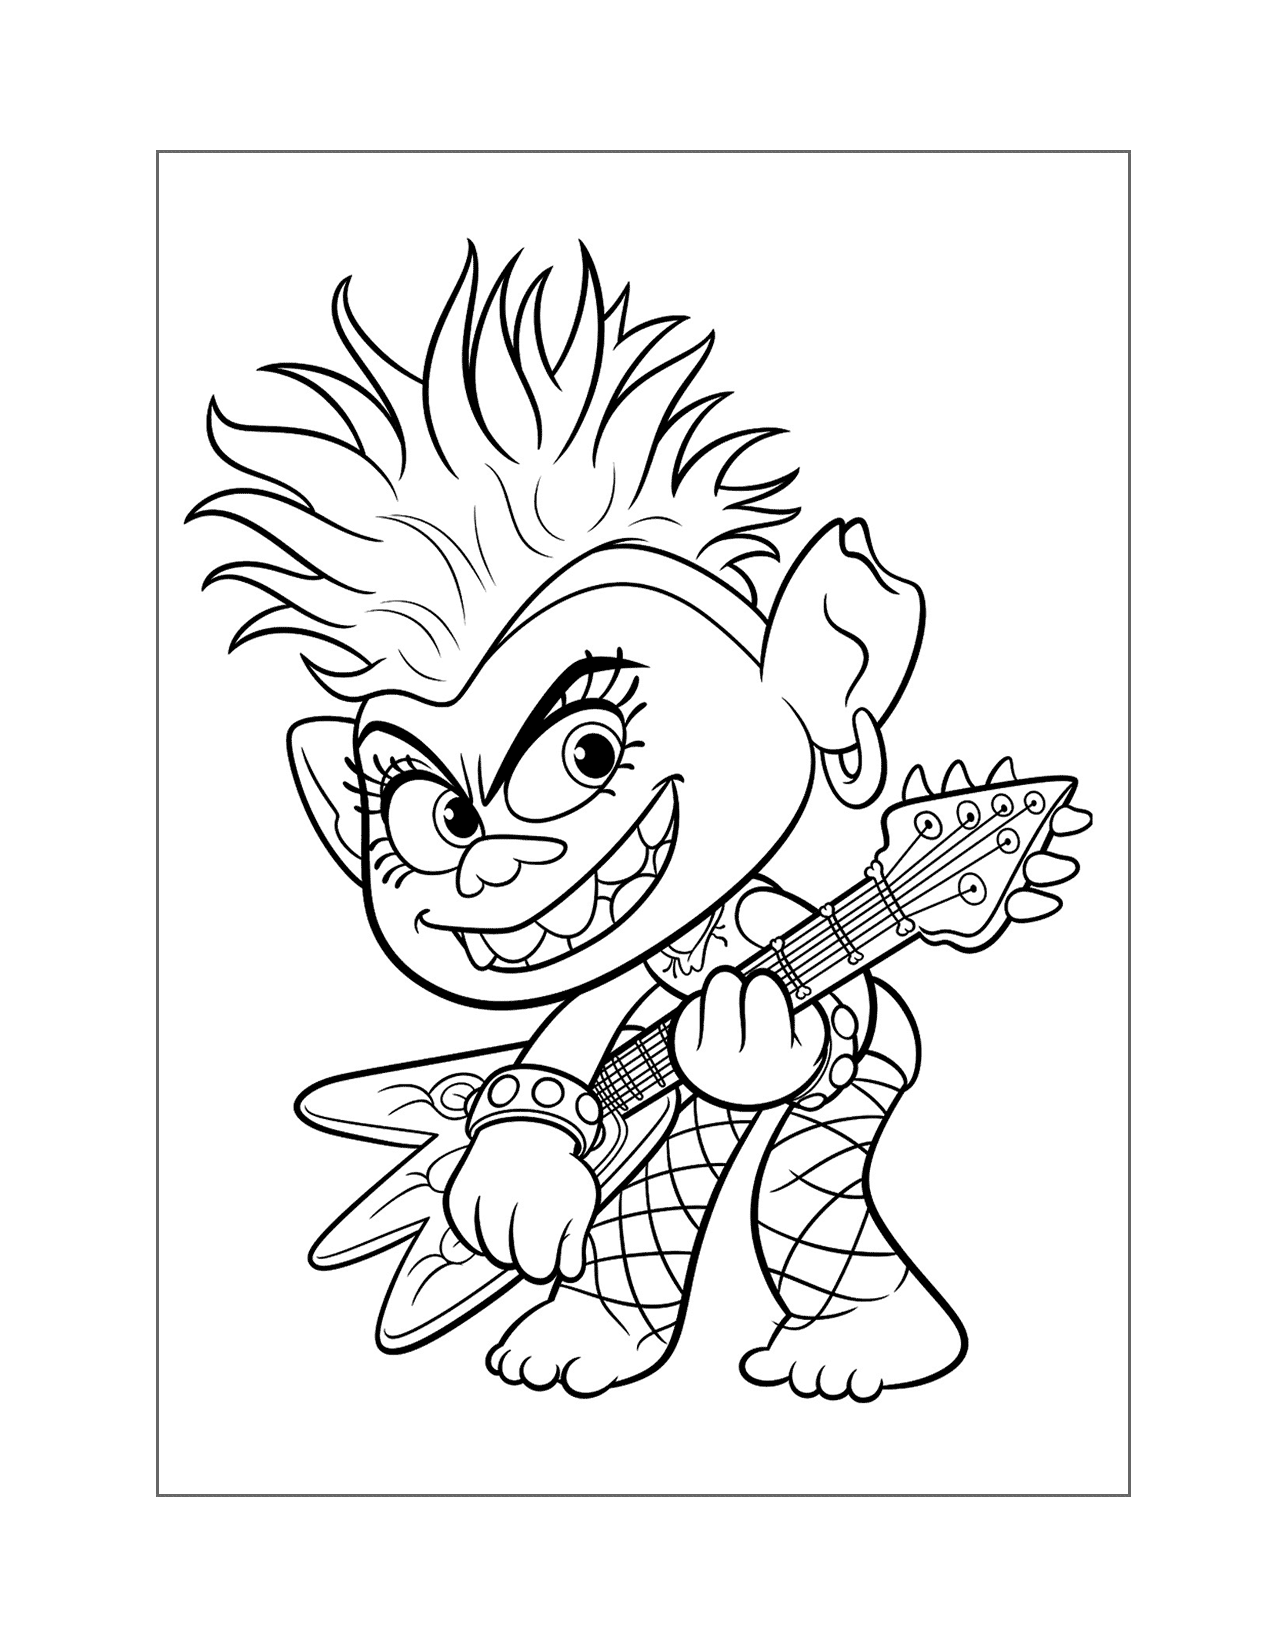 Queen Barb Trolls Coloring Page